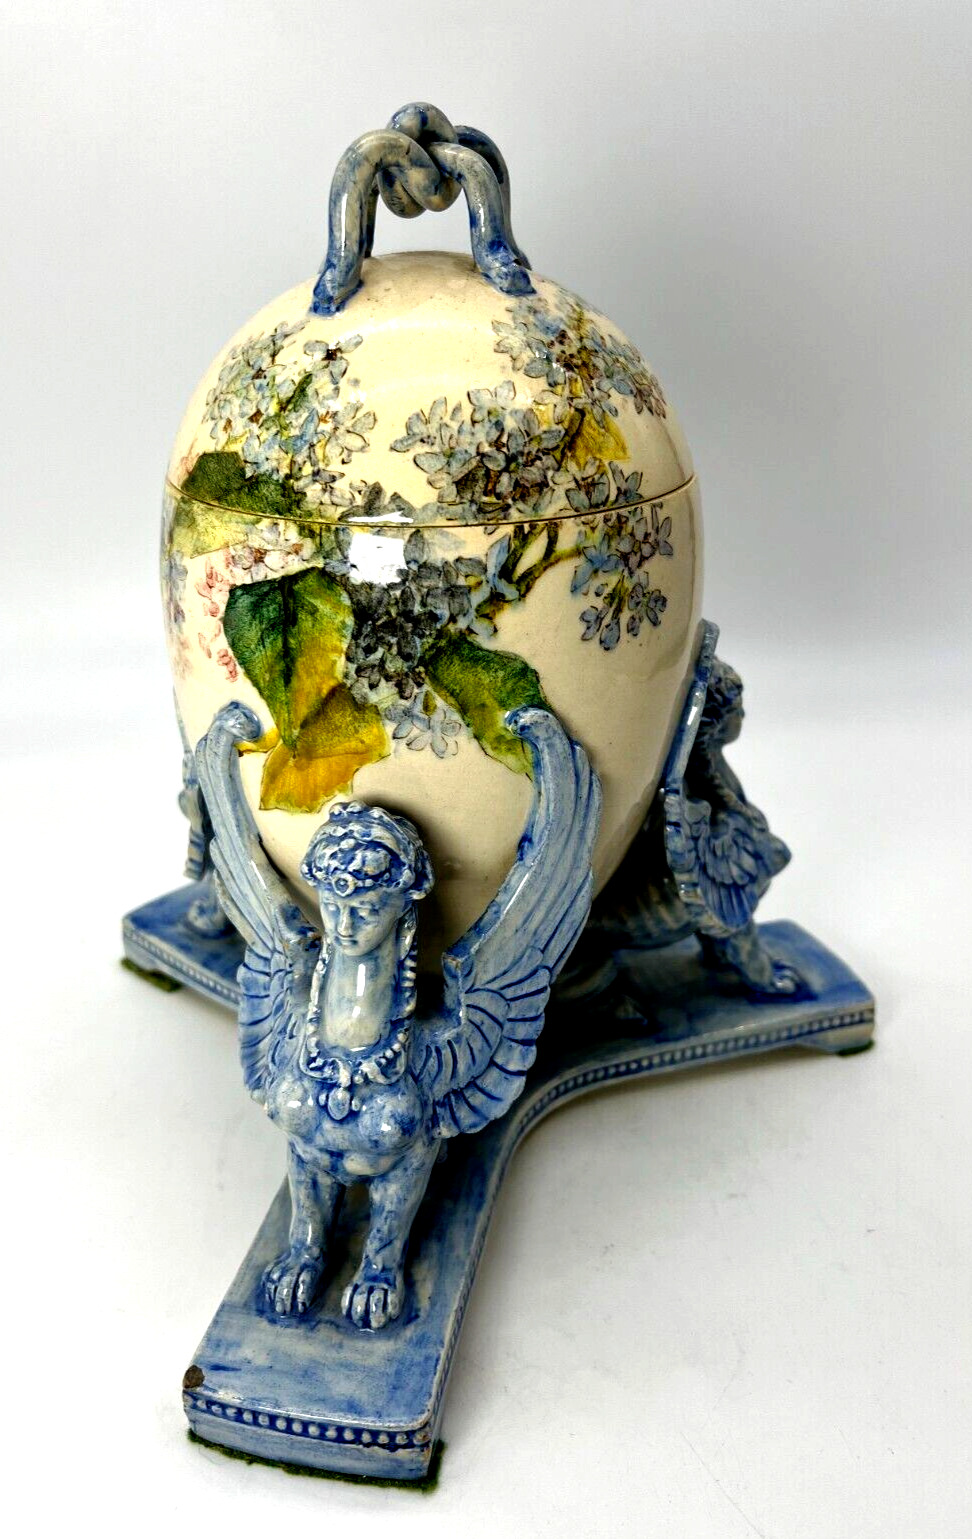 Antique Majolica Hand-Painted Pottery Winged Female Sphinx Guards Egg Vase